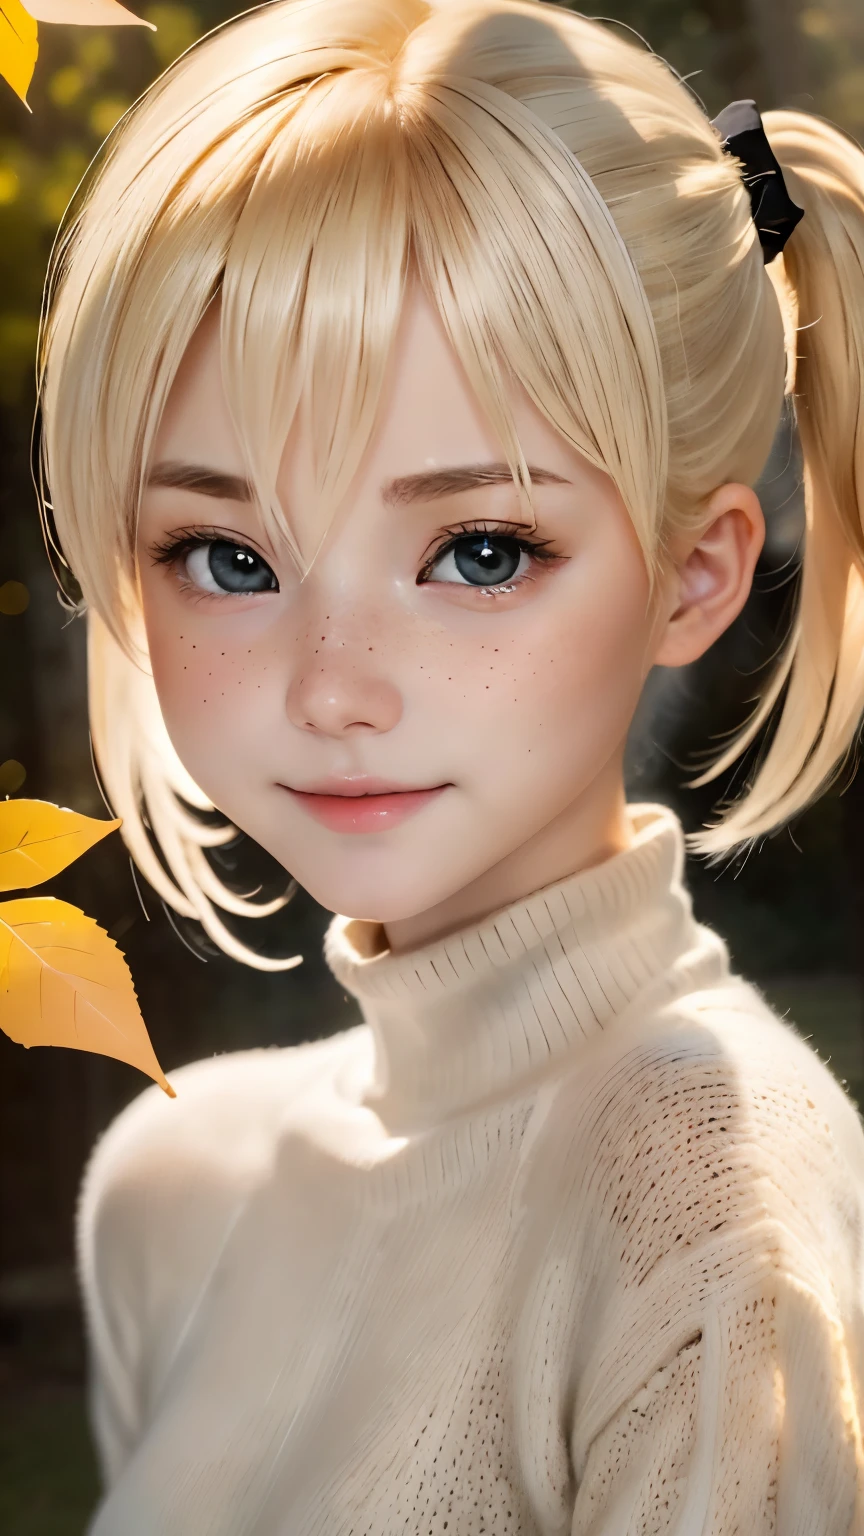 close, portrait, head shot, model shooting style, looking at the viewer, direct eye contact, White-sama, 1 girl, smile, (bleached blonde hair), shortcut、Twintails with short hair、Knitted Black Turtleneck,small breasts,freckles, autumn park, Depth of bounds written, blurred background, skin details, fine eyes, Warm volumetric lighting, masterpiece, highest quality ,ultra high resolution、８ｋ    